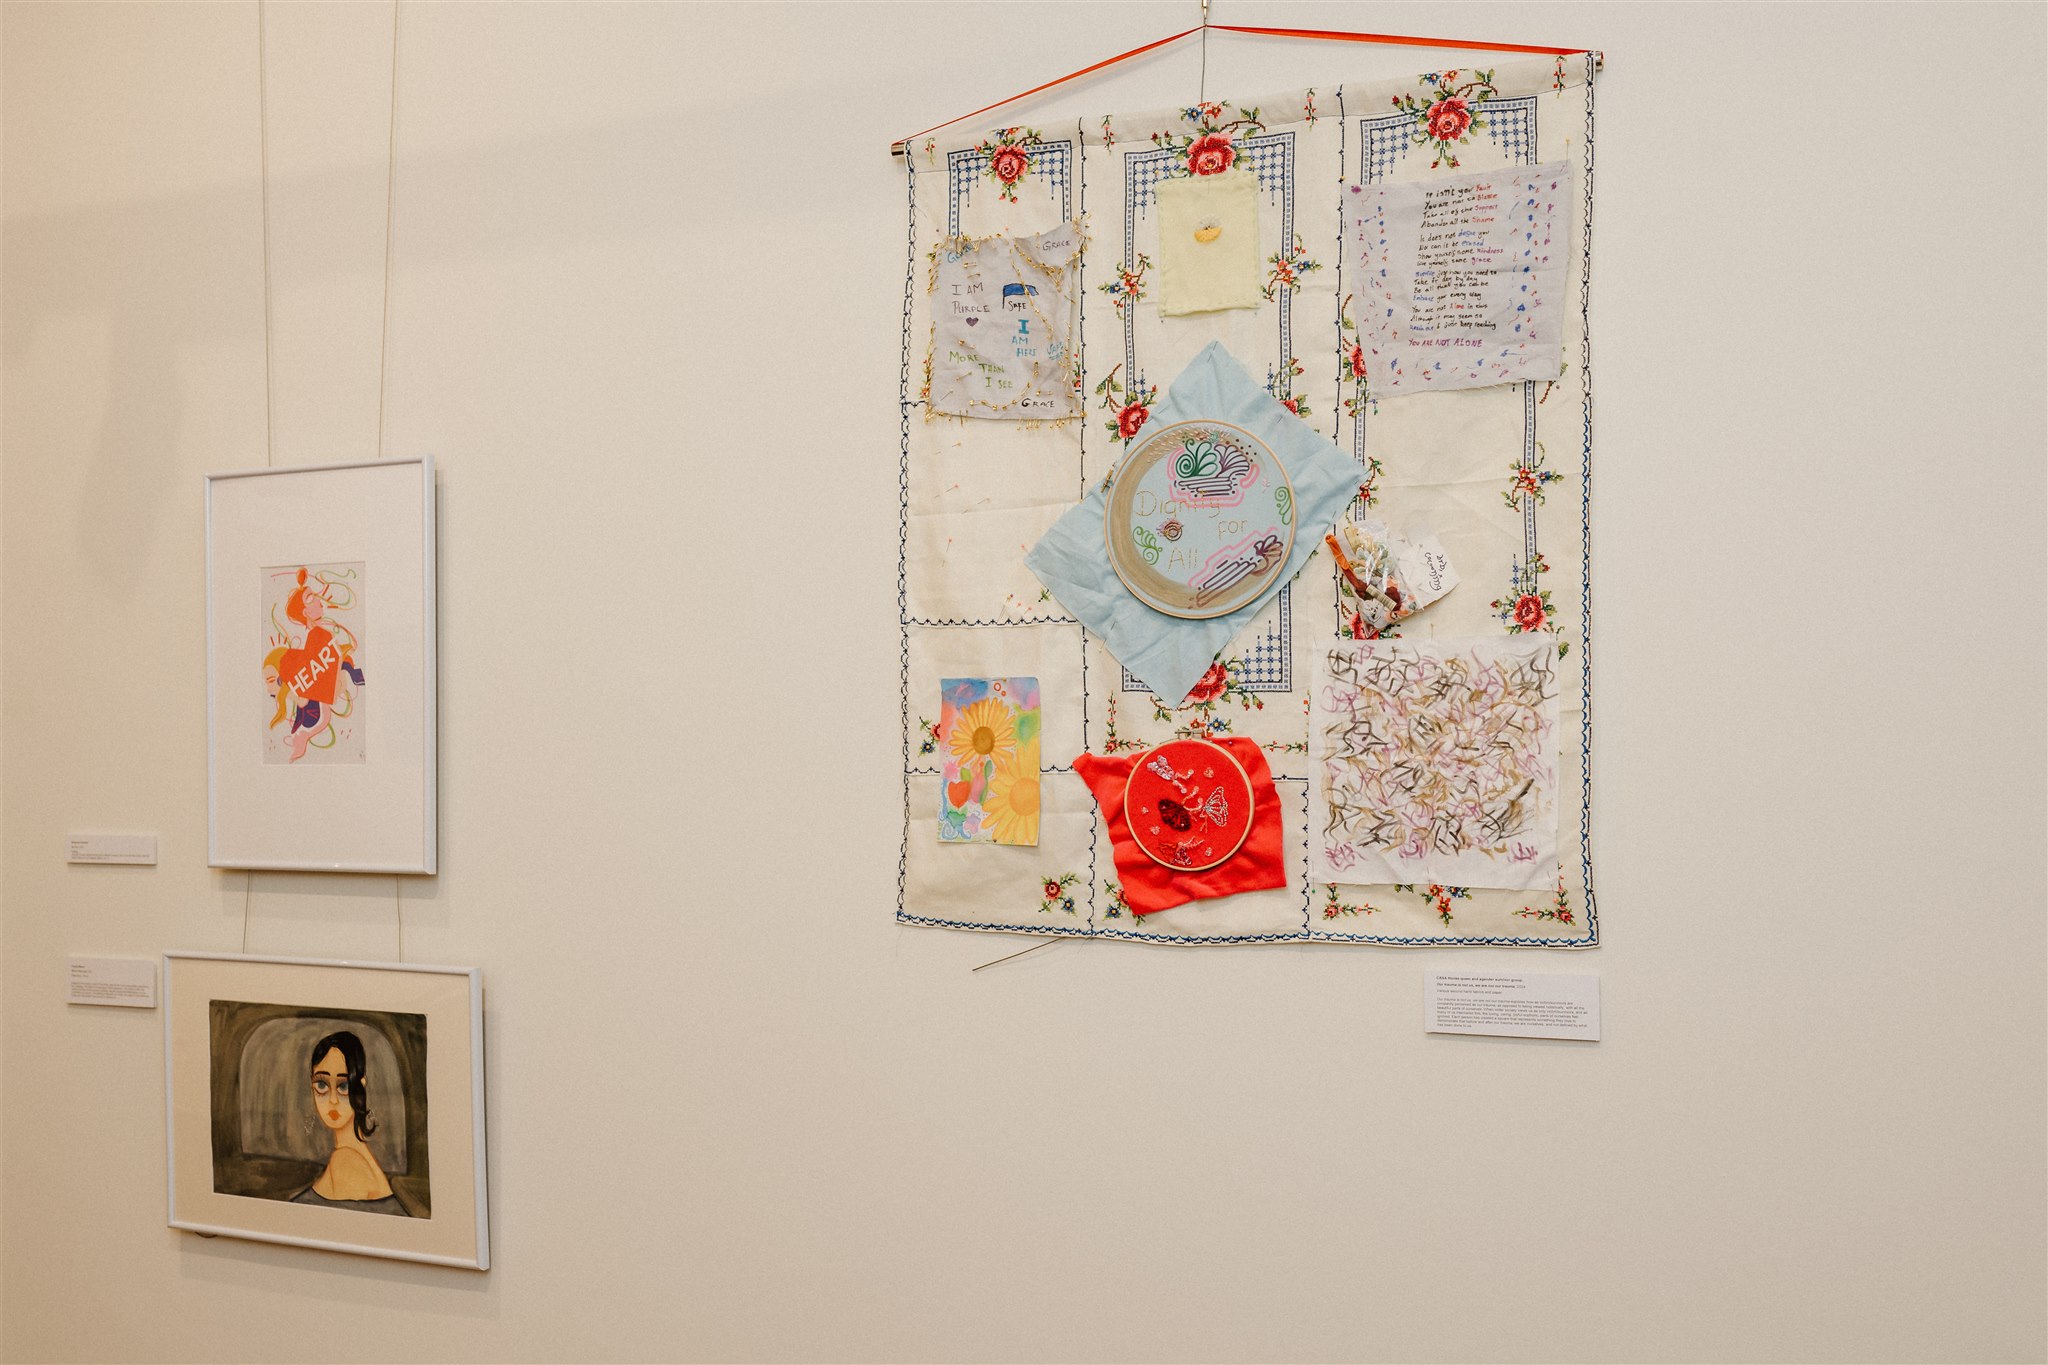 Patterned textiles and drawings created by different individuals are combined and displayed in one artwork.